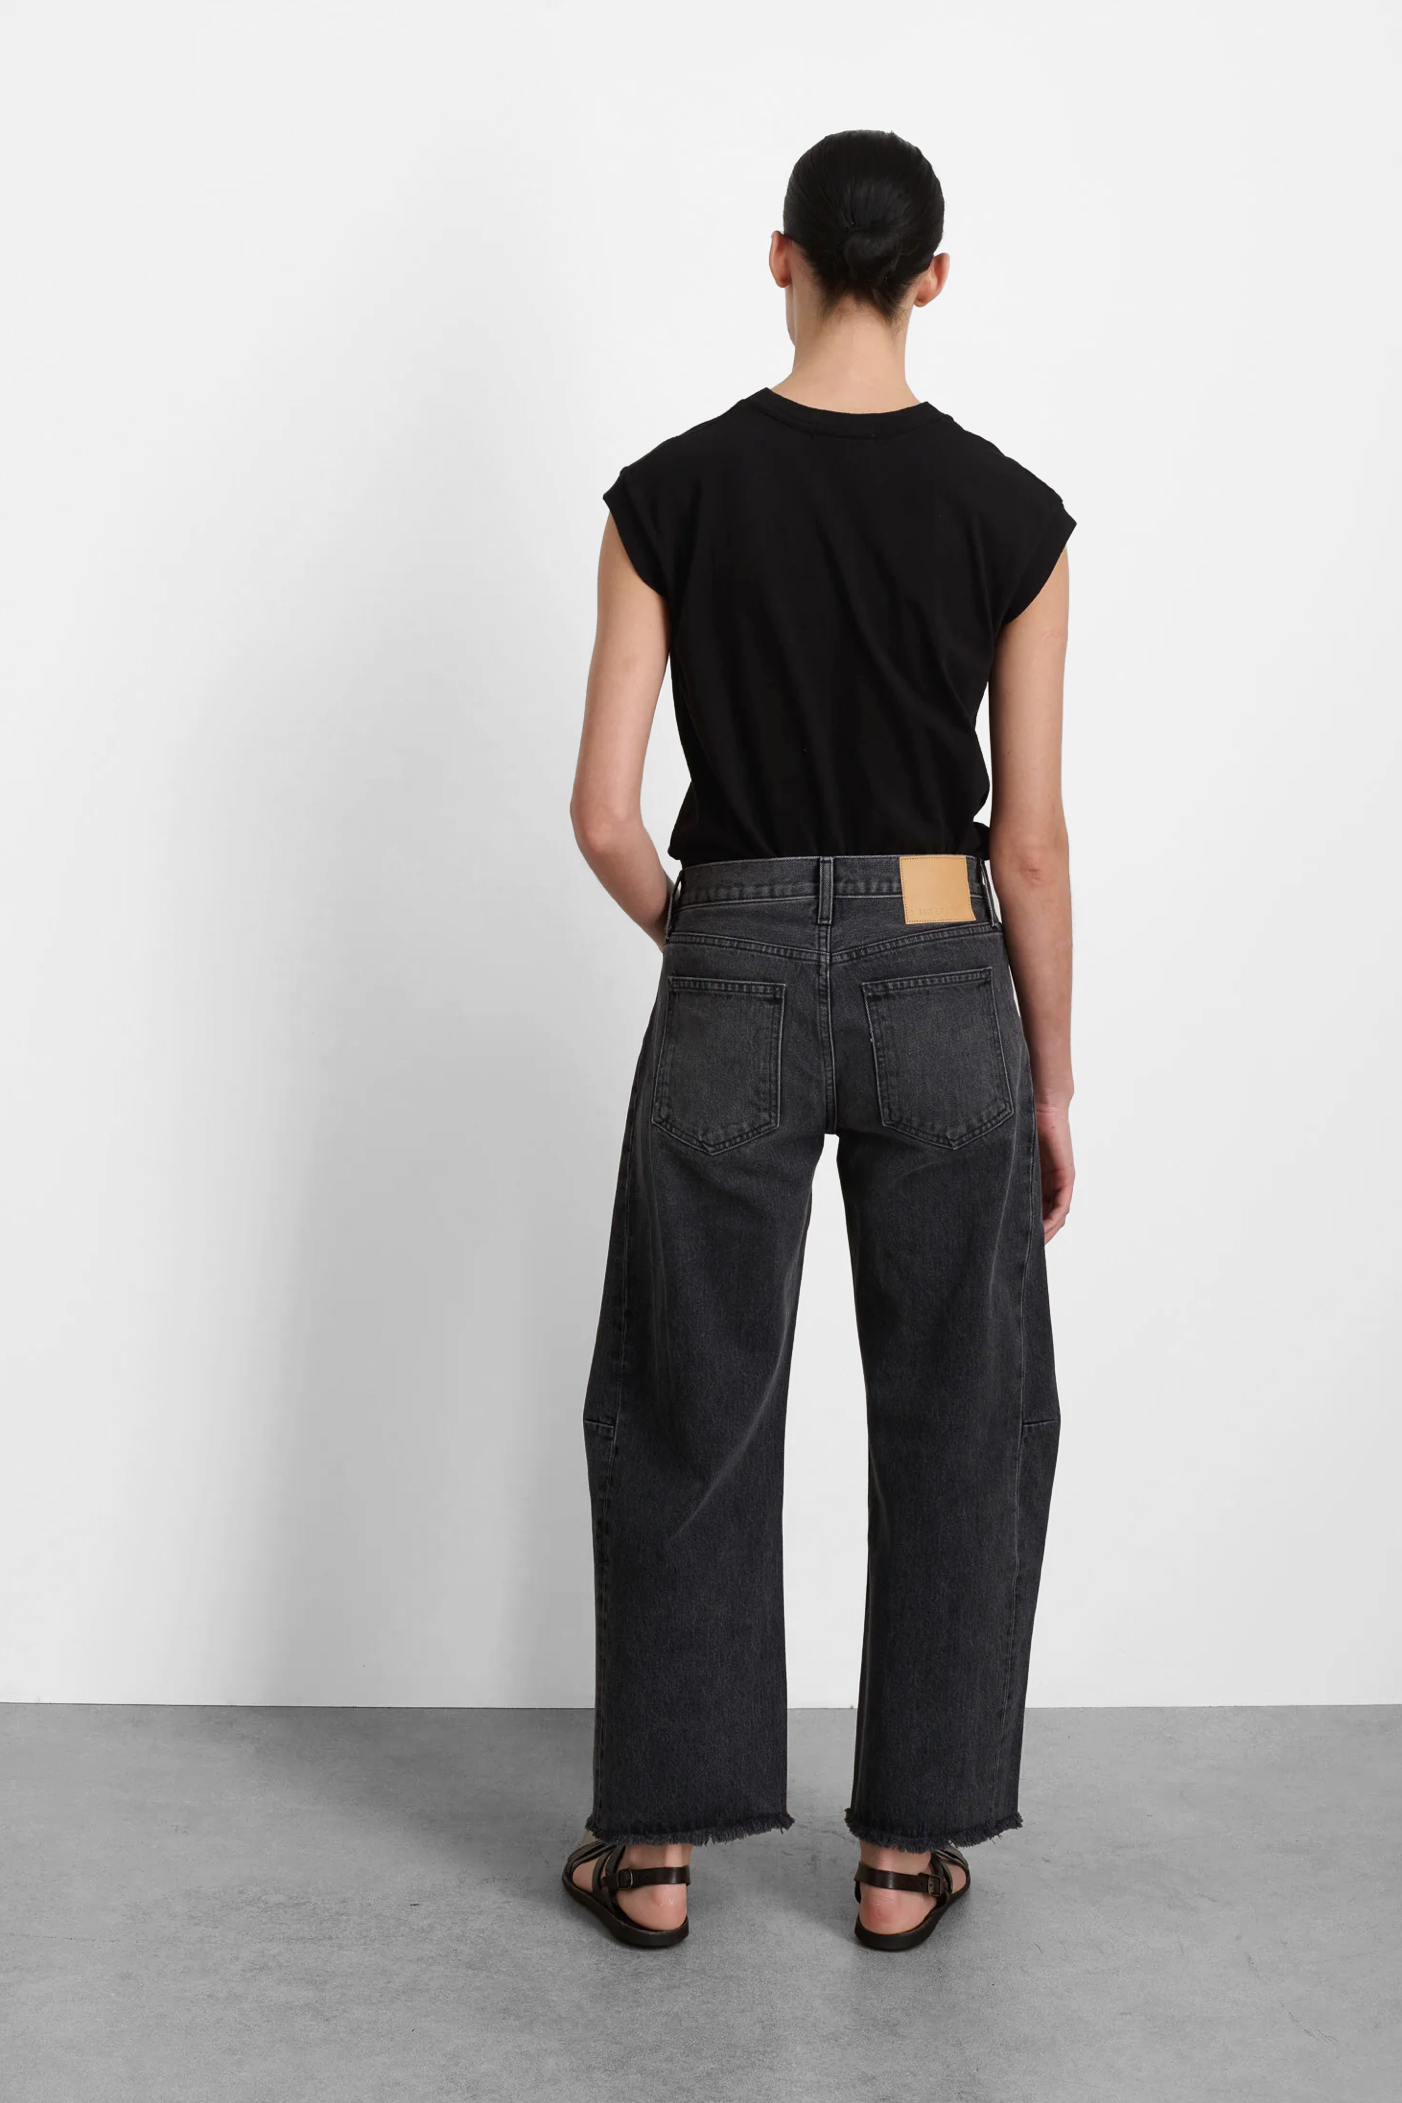 Relaxed Lasso Jean in Stil Black by B Sides